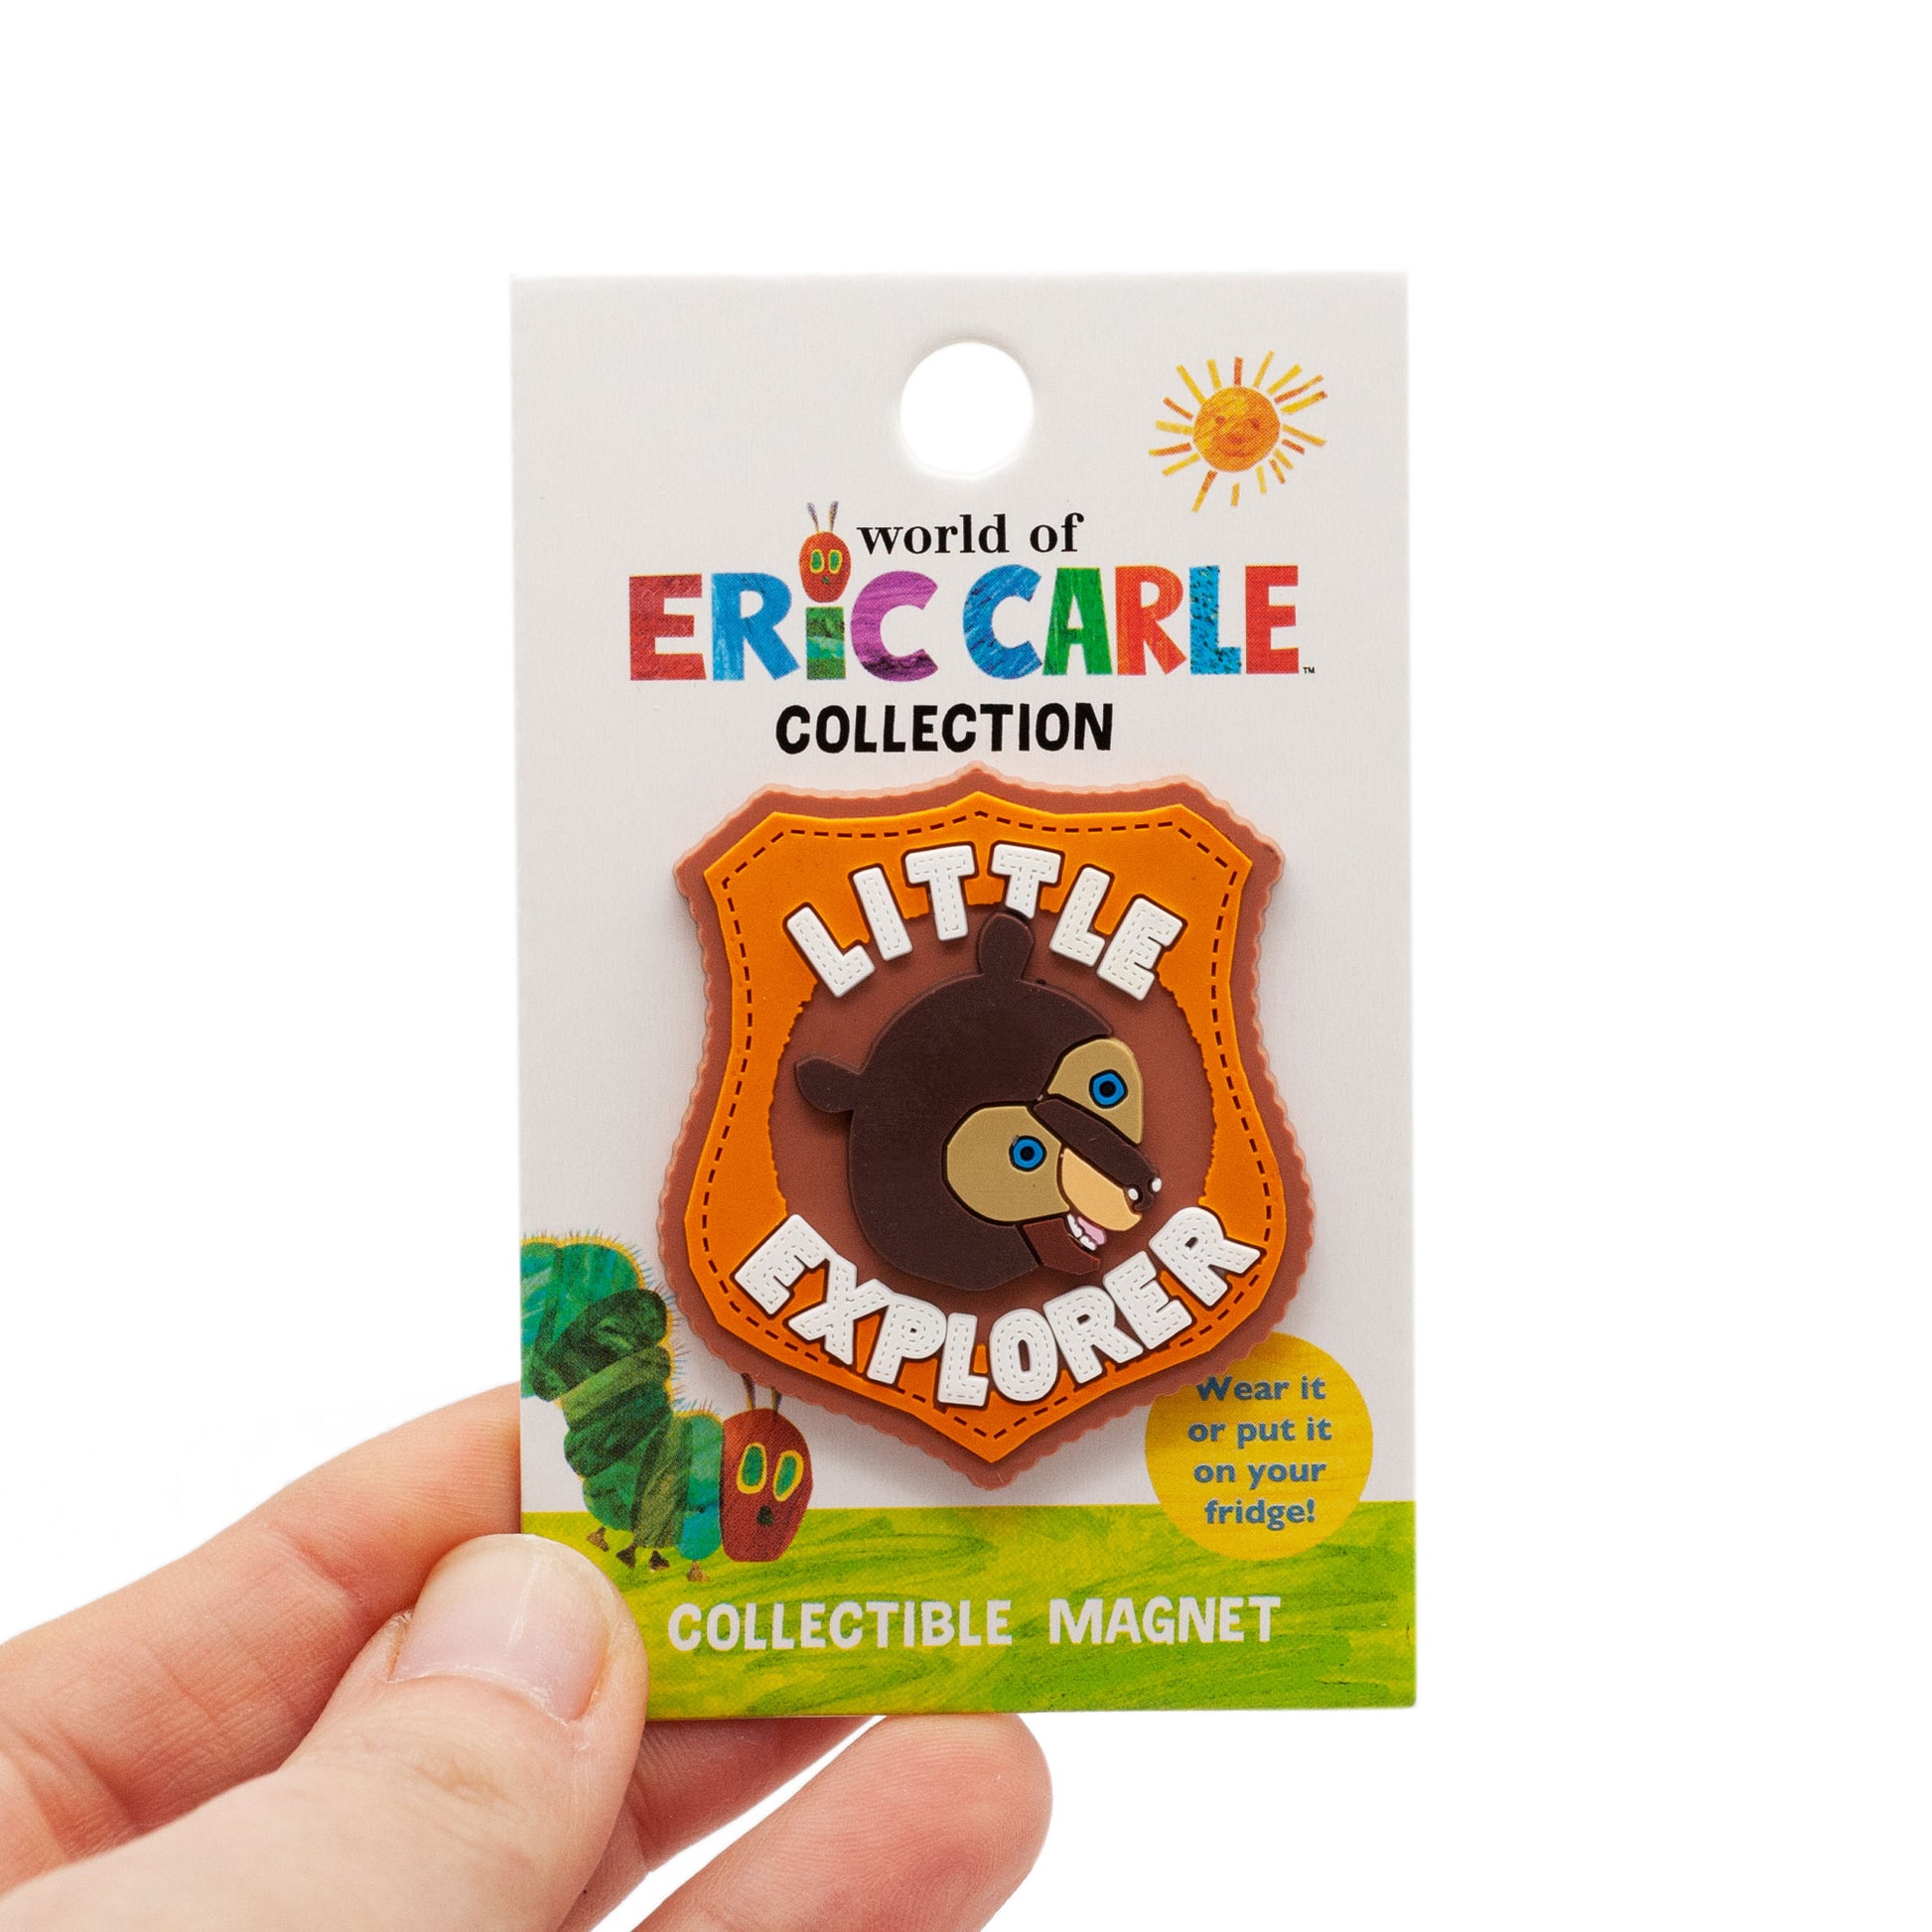 Little Explorer magnet made of soft PVC. Bown bear in the center with letter above and below bear. Colors include light brown, orange , dark brown, blue eyes, and white lettering. Lettering says "little explorer". on backing card.